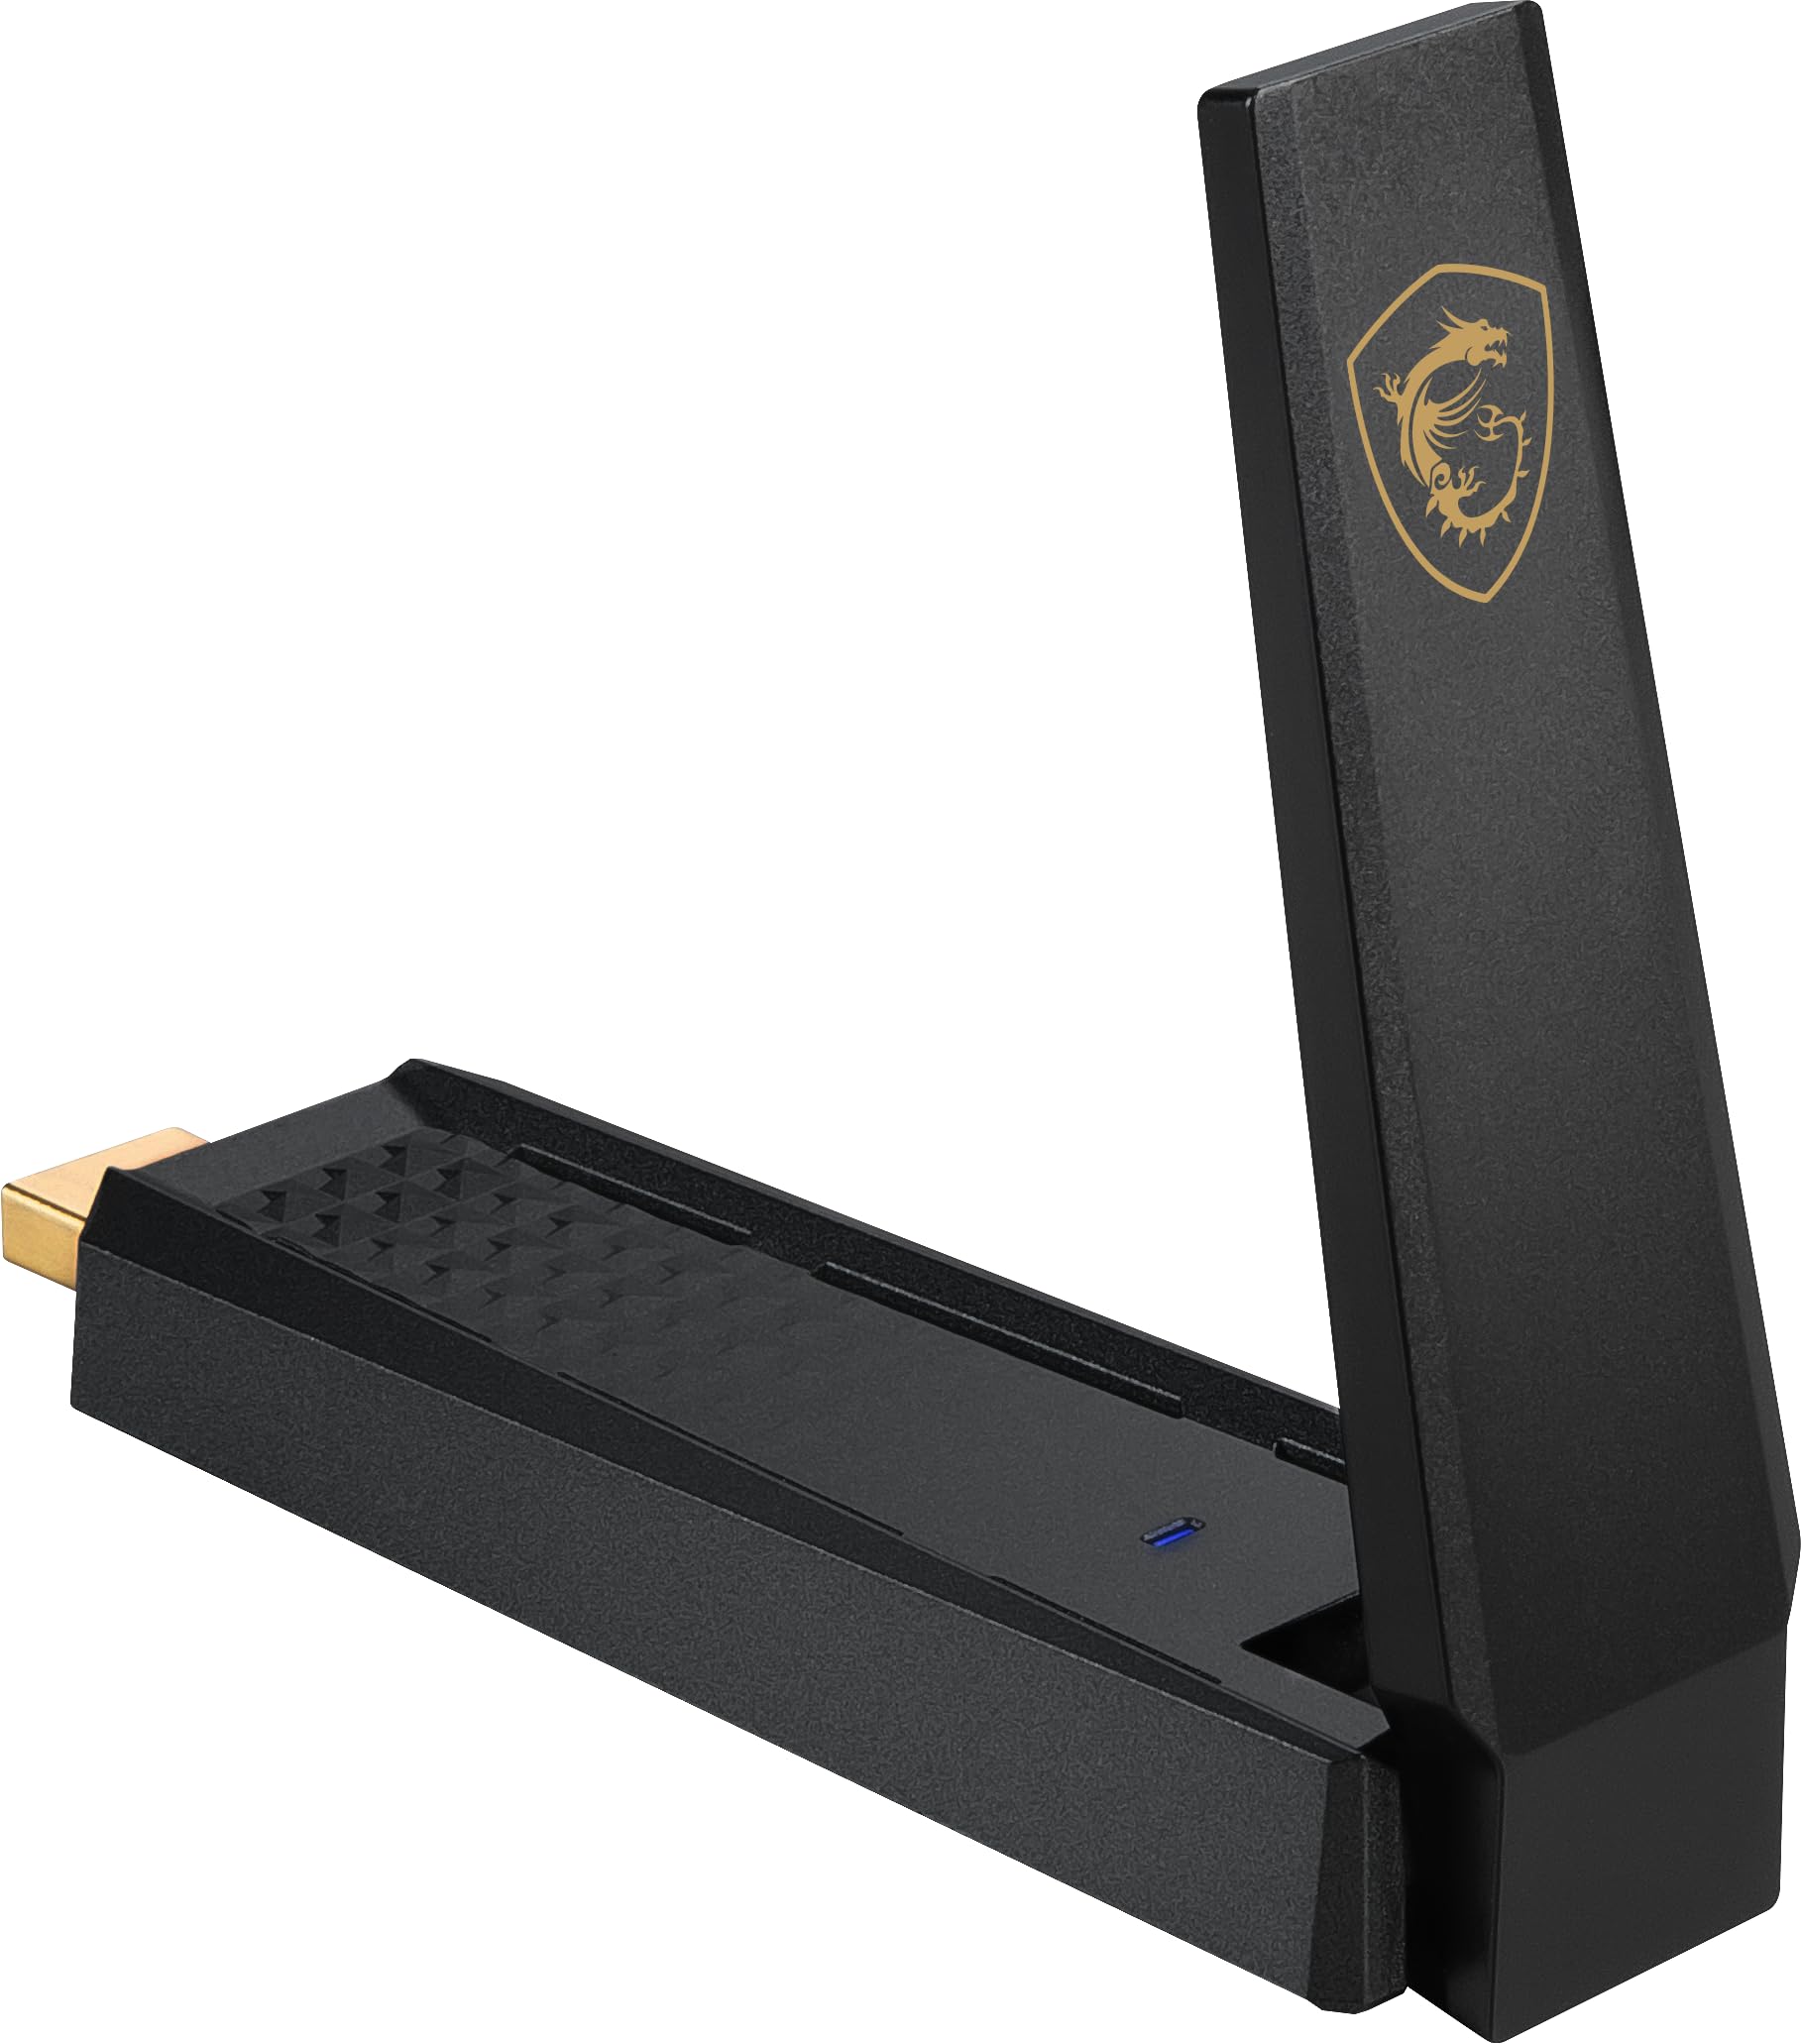 MSI Gaming AXE5400 WiFi USB Adapter - WLAN up to 5400 Mbps (6GHz, 5GHz, 2.4GHz Wireless), USB 3.2 Gen 1, MU-MIMO, 2X High-Gain Tri-Band Antennas, Beamforming, WPA3 - Cradle Included